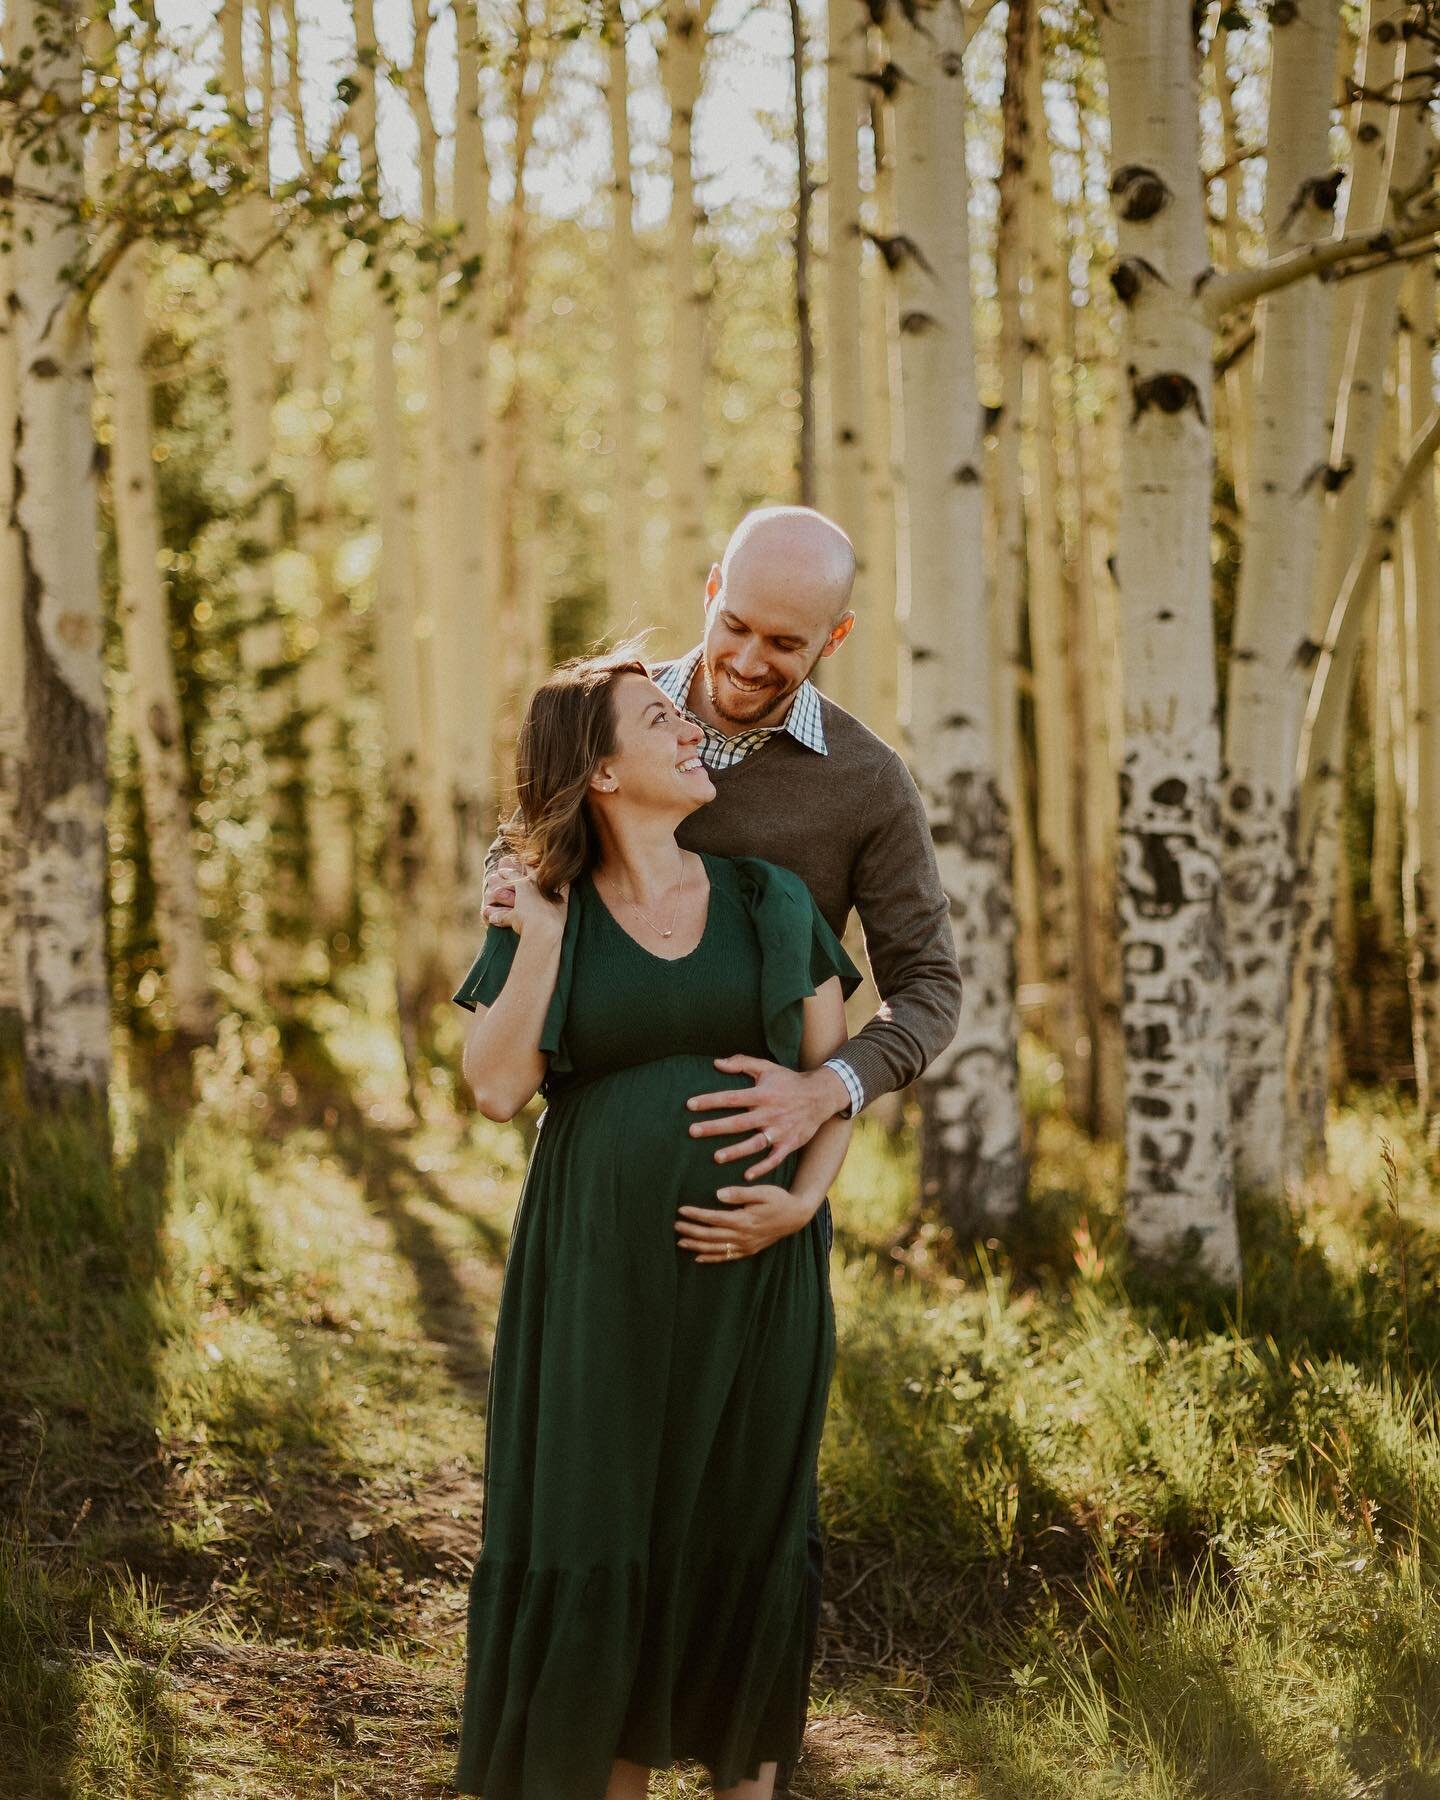 The aspen trees came out to PLAY during this beautiful maternity shoot with S &amp; J 😍🍁 even though it&rsquo;s still 80 degrees in Denver, we were definitely feeling the autumn vibes during this session. I&rsquo;m so excited for these two and can&